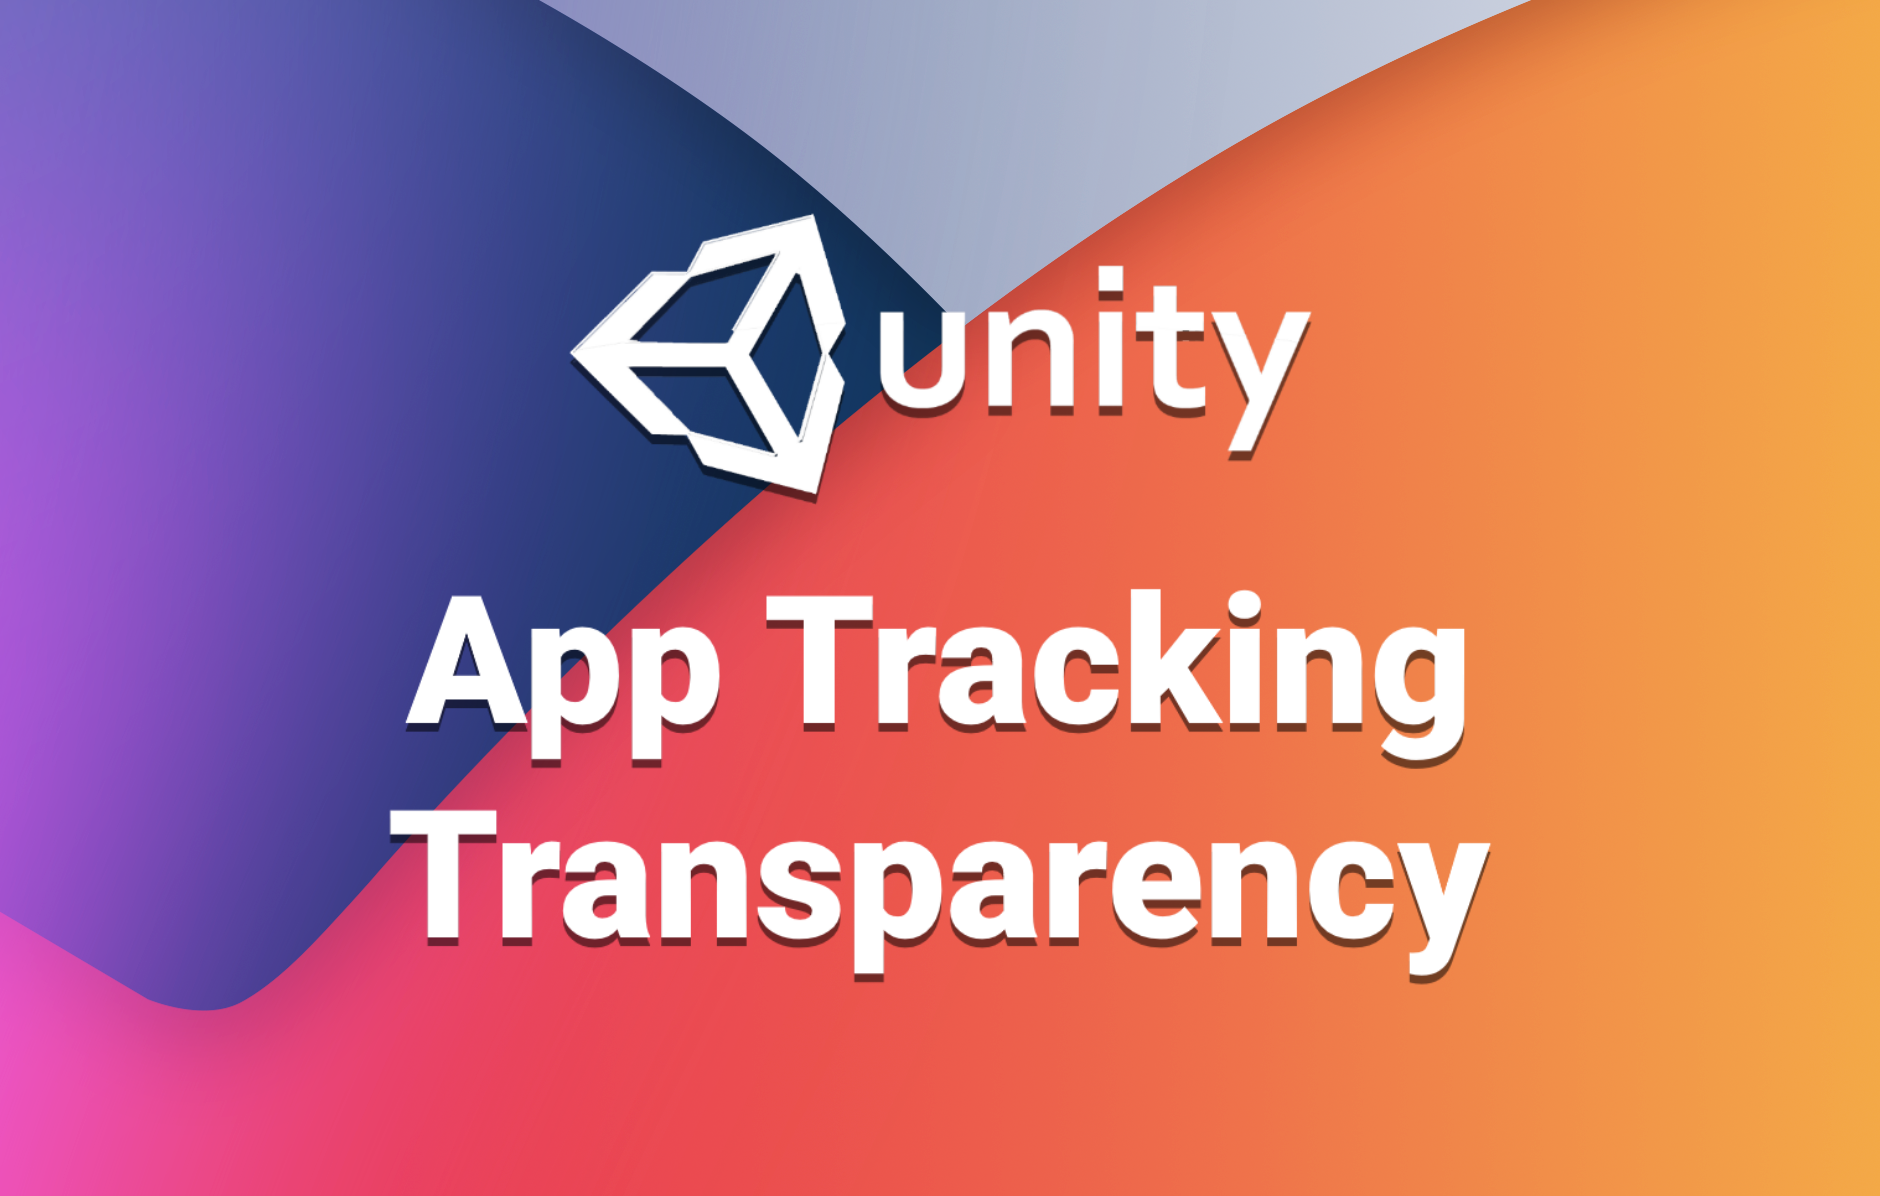 A Unity Dev’s Guide to App Tracking Transparency, IDFA and iOS 14